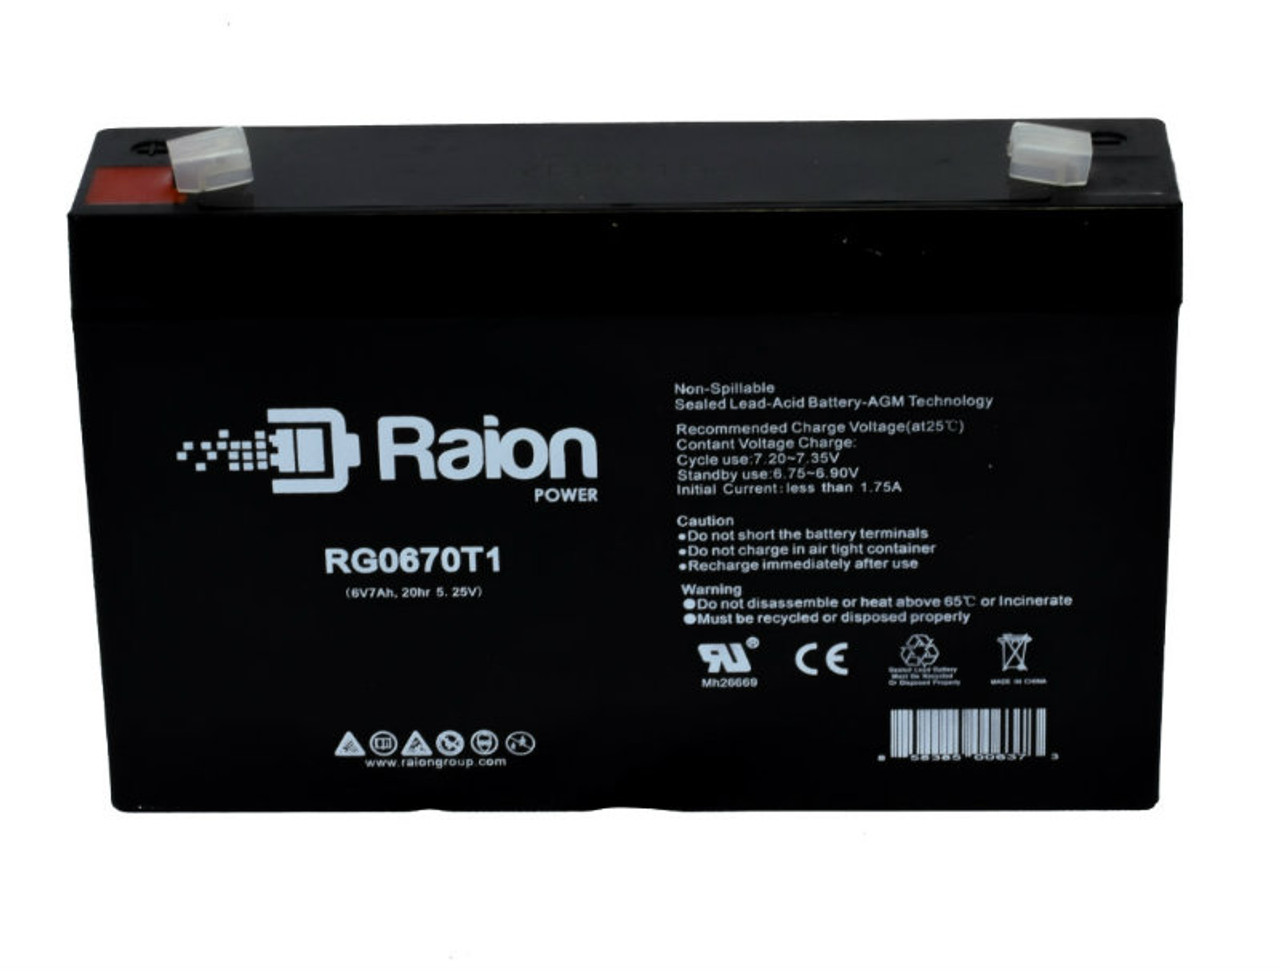 Raion Power RG0670T1 Replacement Battery Cartridge for Sure-Lites AA2